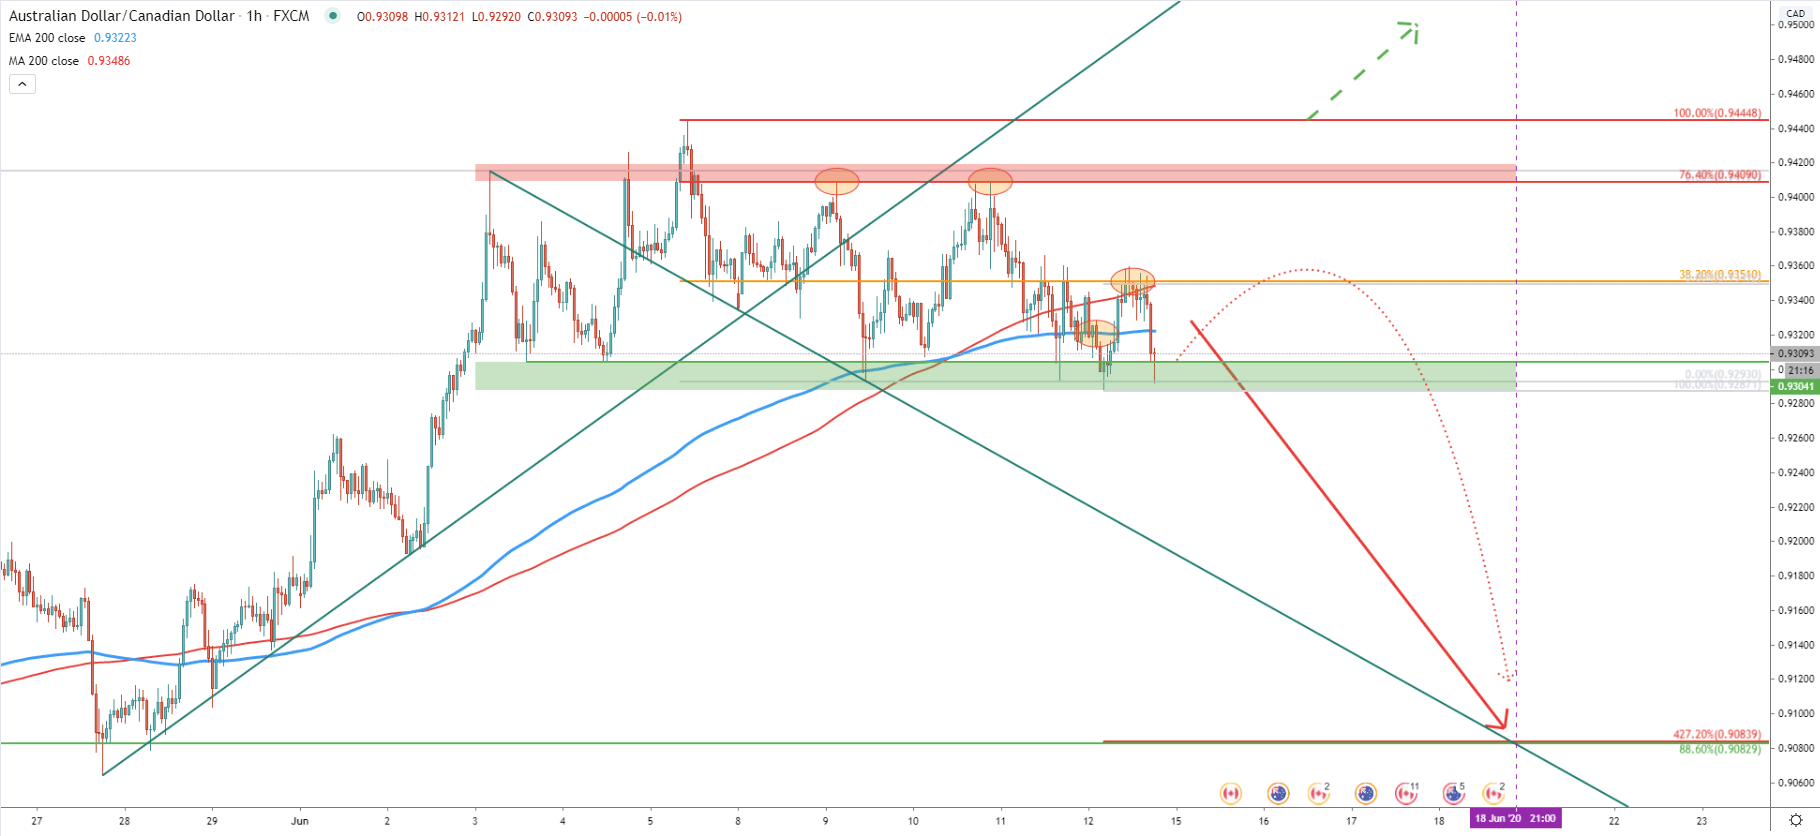 AUD/CAD 1-Hour Technical Analysis 12 June 2020